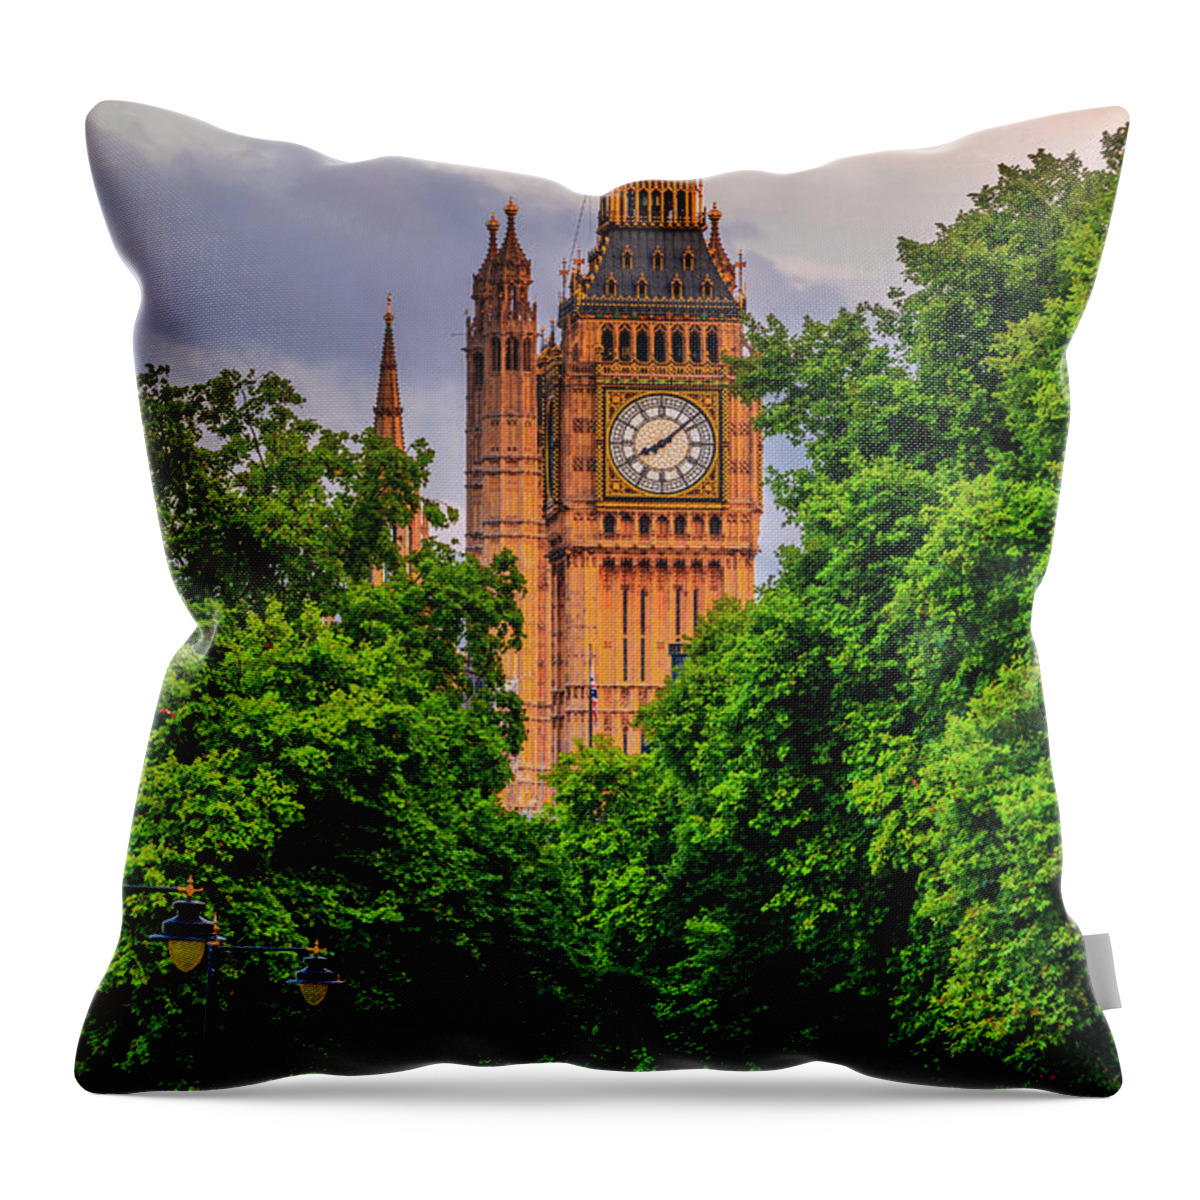 Estock Throw Pillow featuring the digital art England, London, Great Britain, City Of Westminster, Palace Of Westminster, Houses Of Parliament, Big Ben, #1 by Alessandro Saffo